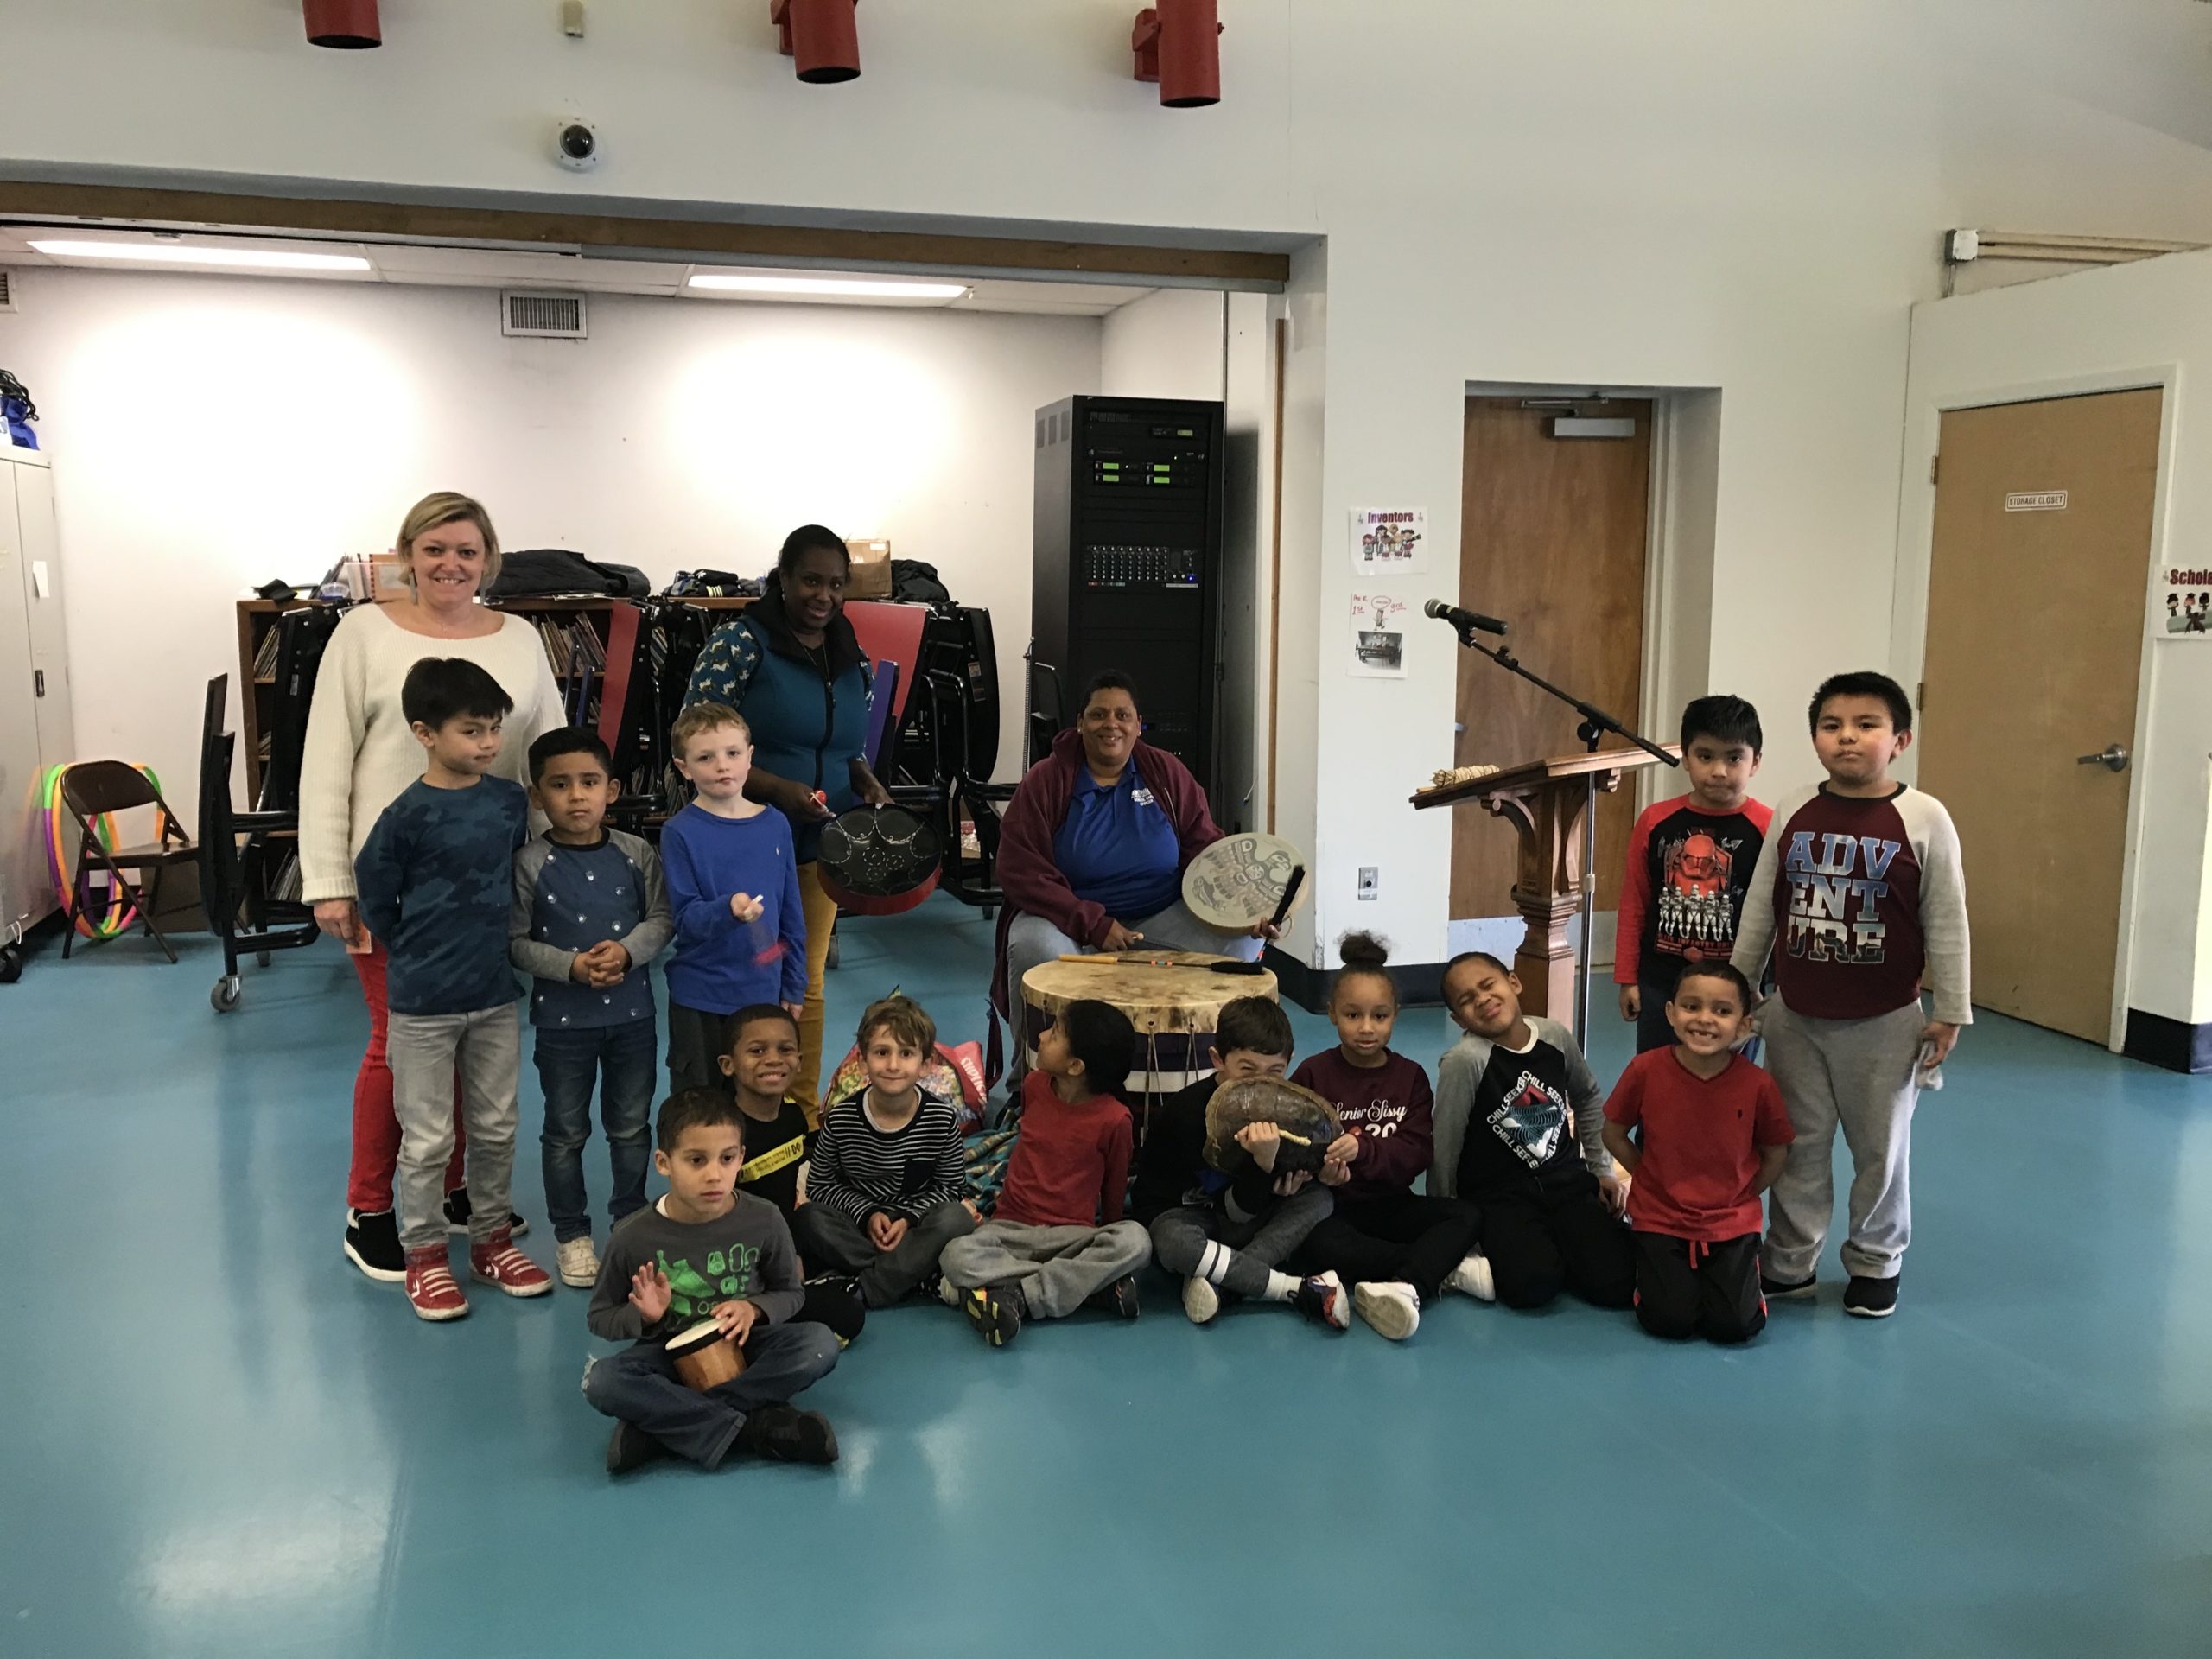 As part of a science lesson on sound, Southampton Elementary School first graders recently participated in a drumming lesson with Serena Lee of the Shinnecock Nation. The students experienced how vibrations make sound and how they can use sound to communicate.